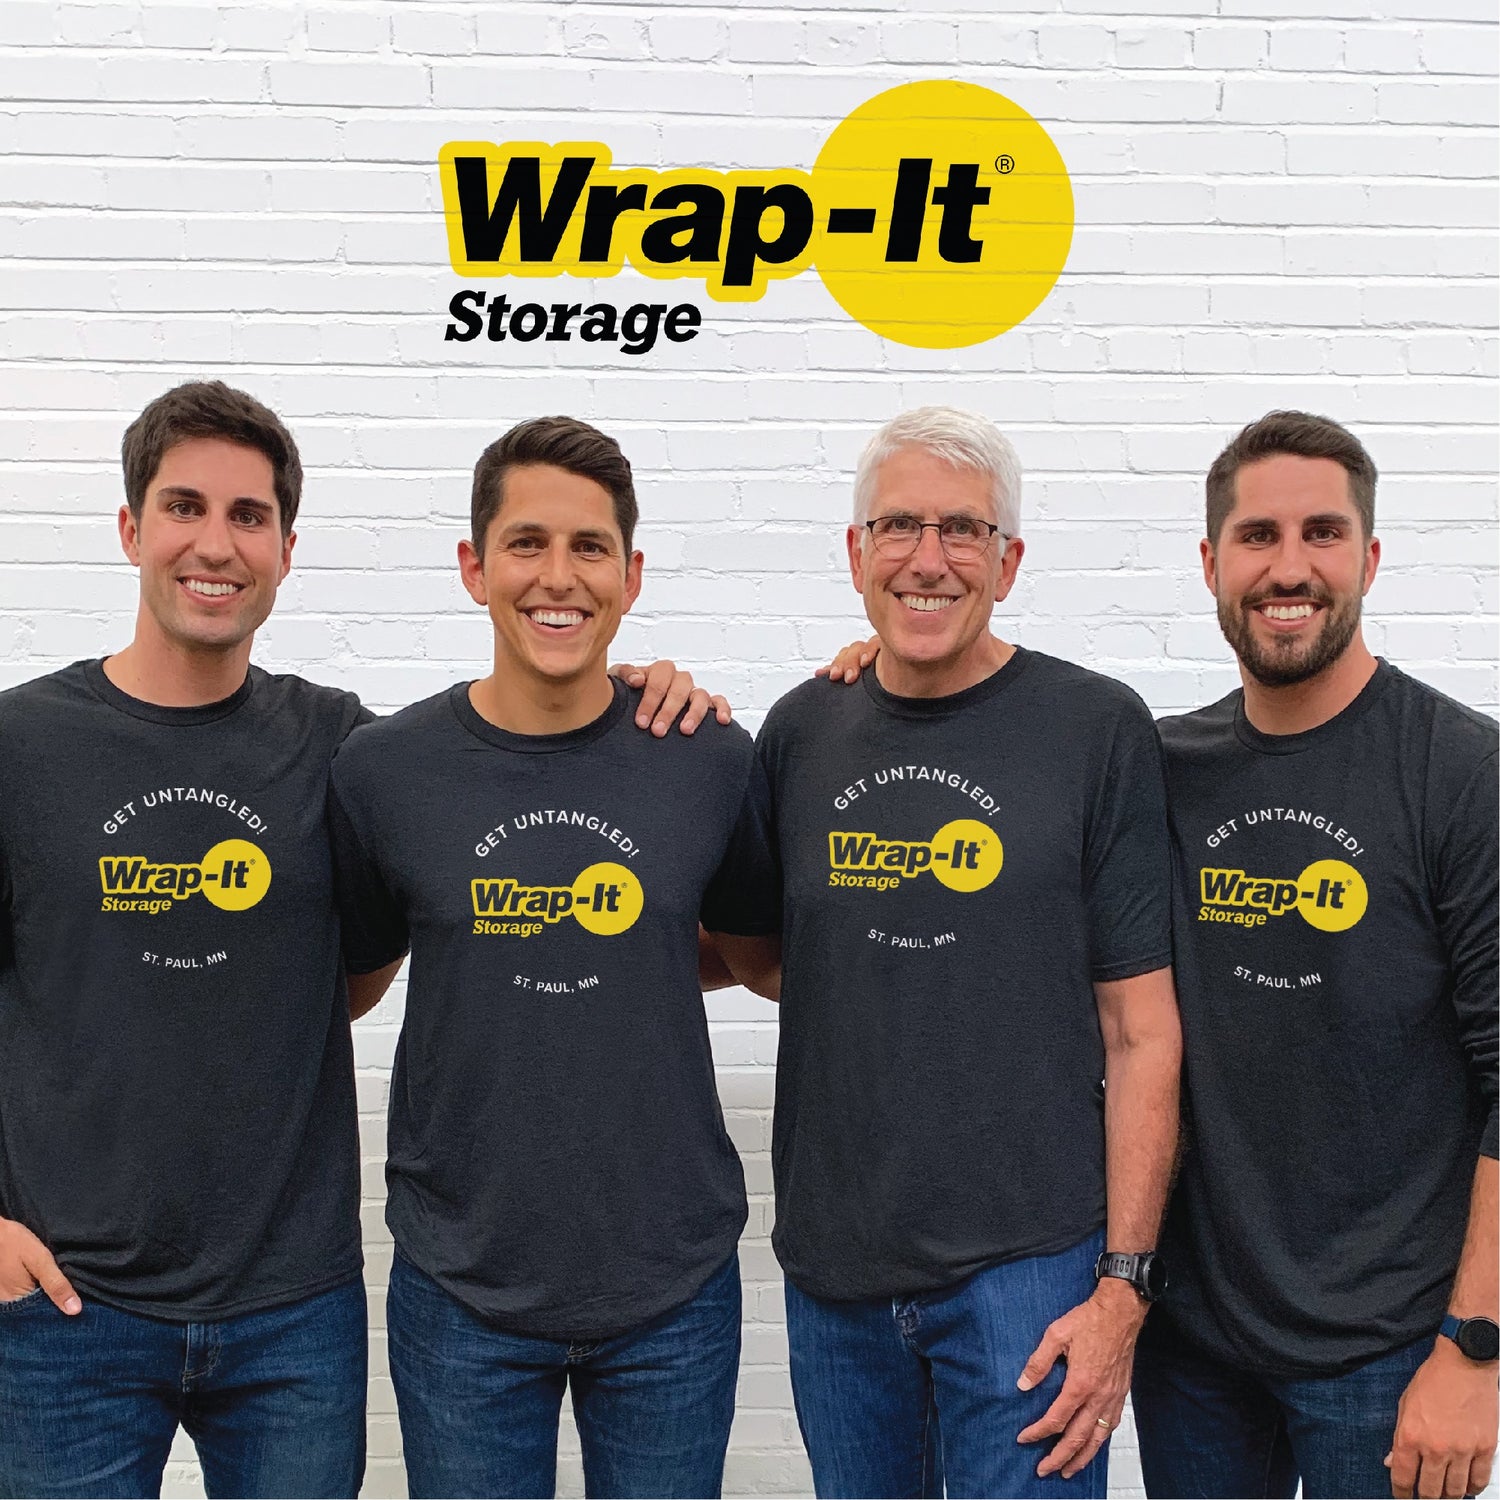 Wrap-It Family photo with 4 guys in black tshirts